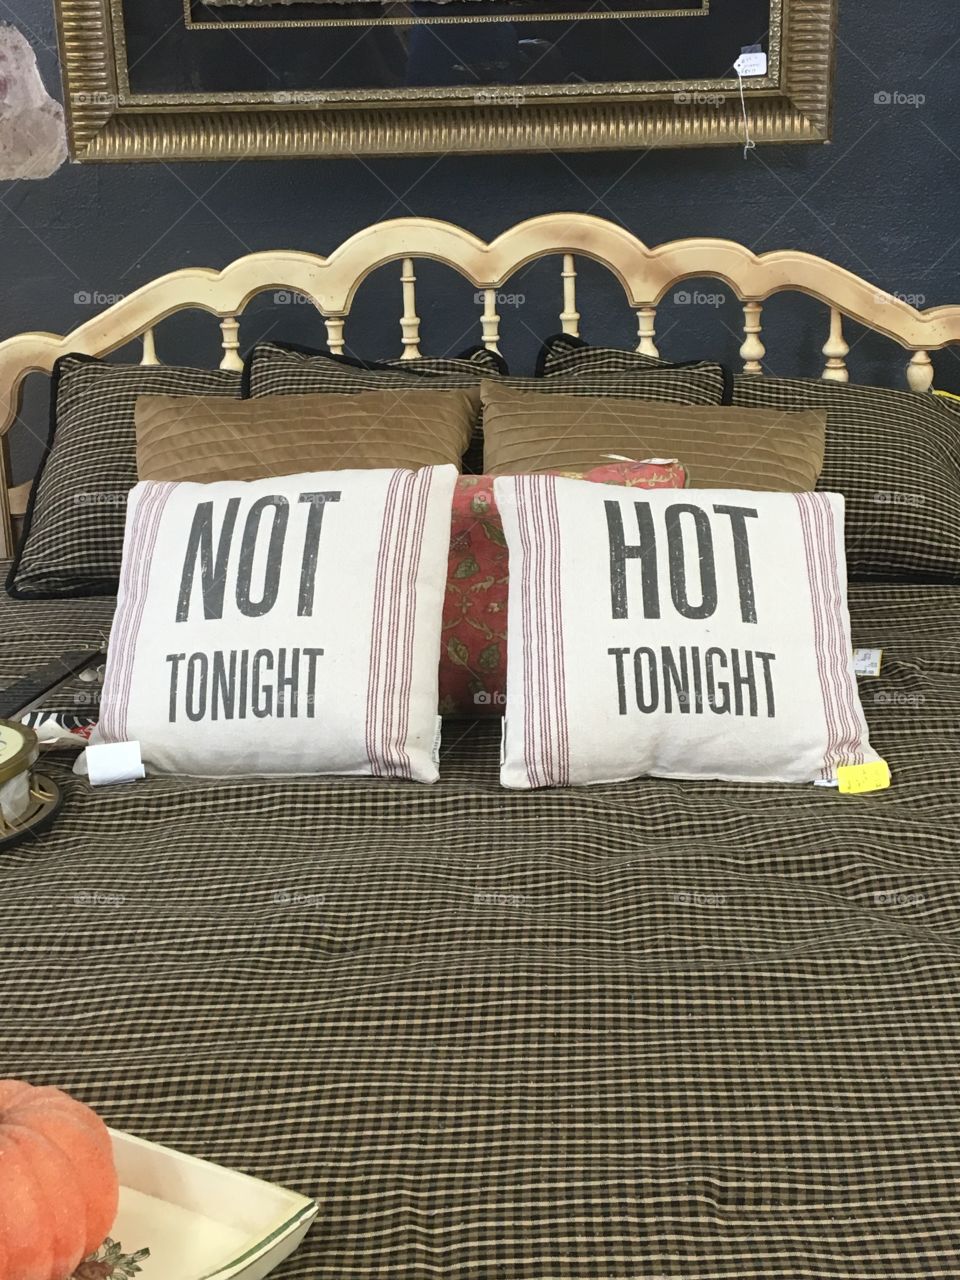 Communication pillows for couples